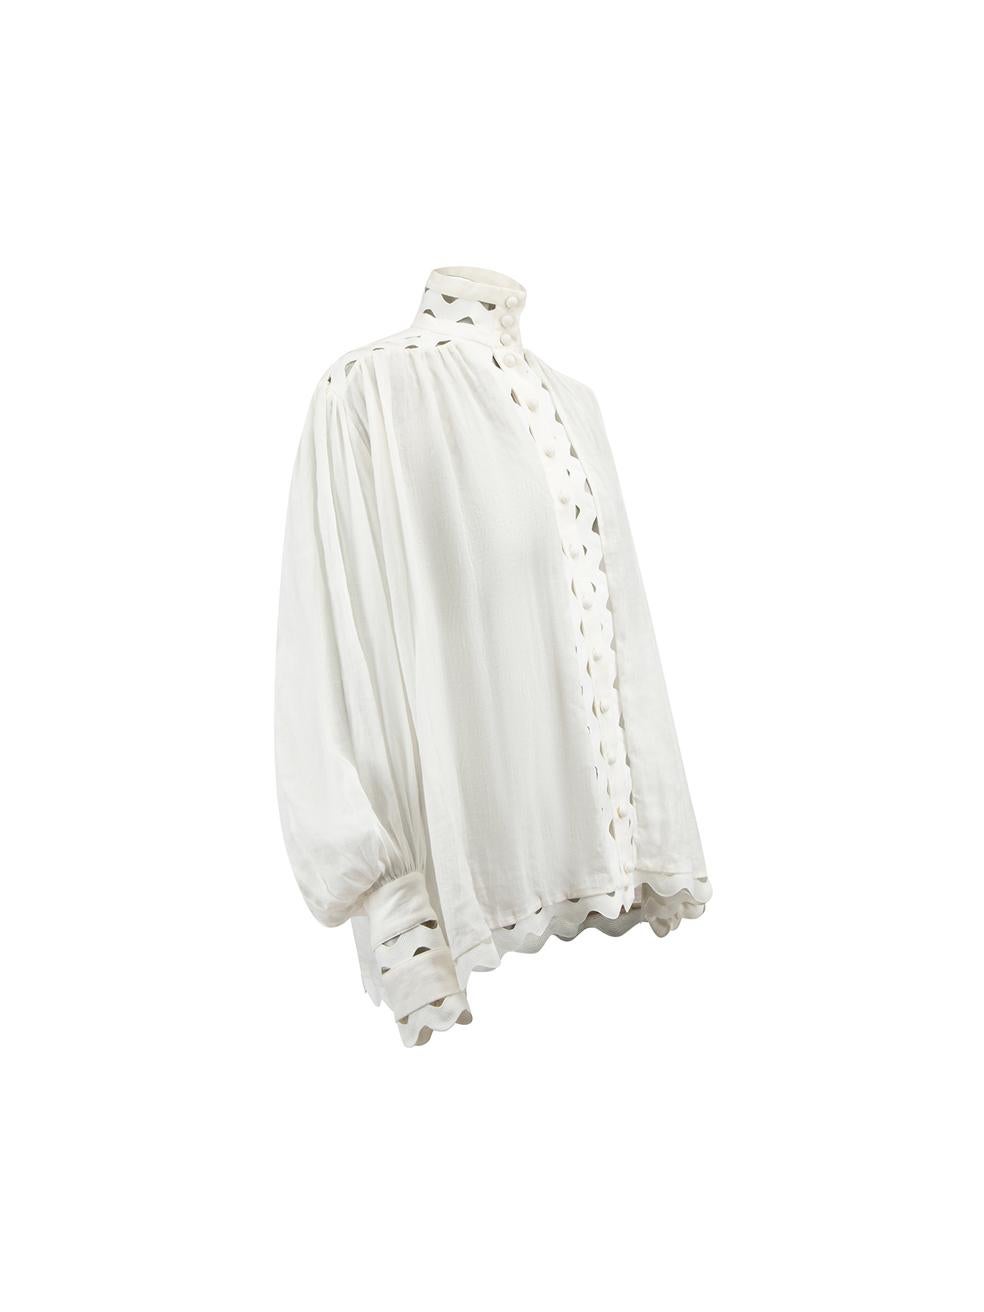 CONDITION is Never worn, with tags. No visible wear to shirt is evident on this new Zimmermann designer resale item. 



Details


White

Ramie

See-through

Long-sleeved blouse

Loose-fitting

Wave trim cutout details

Mock neck

Button-up